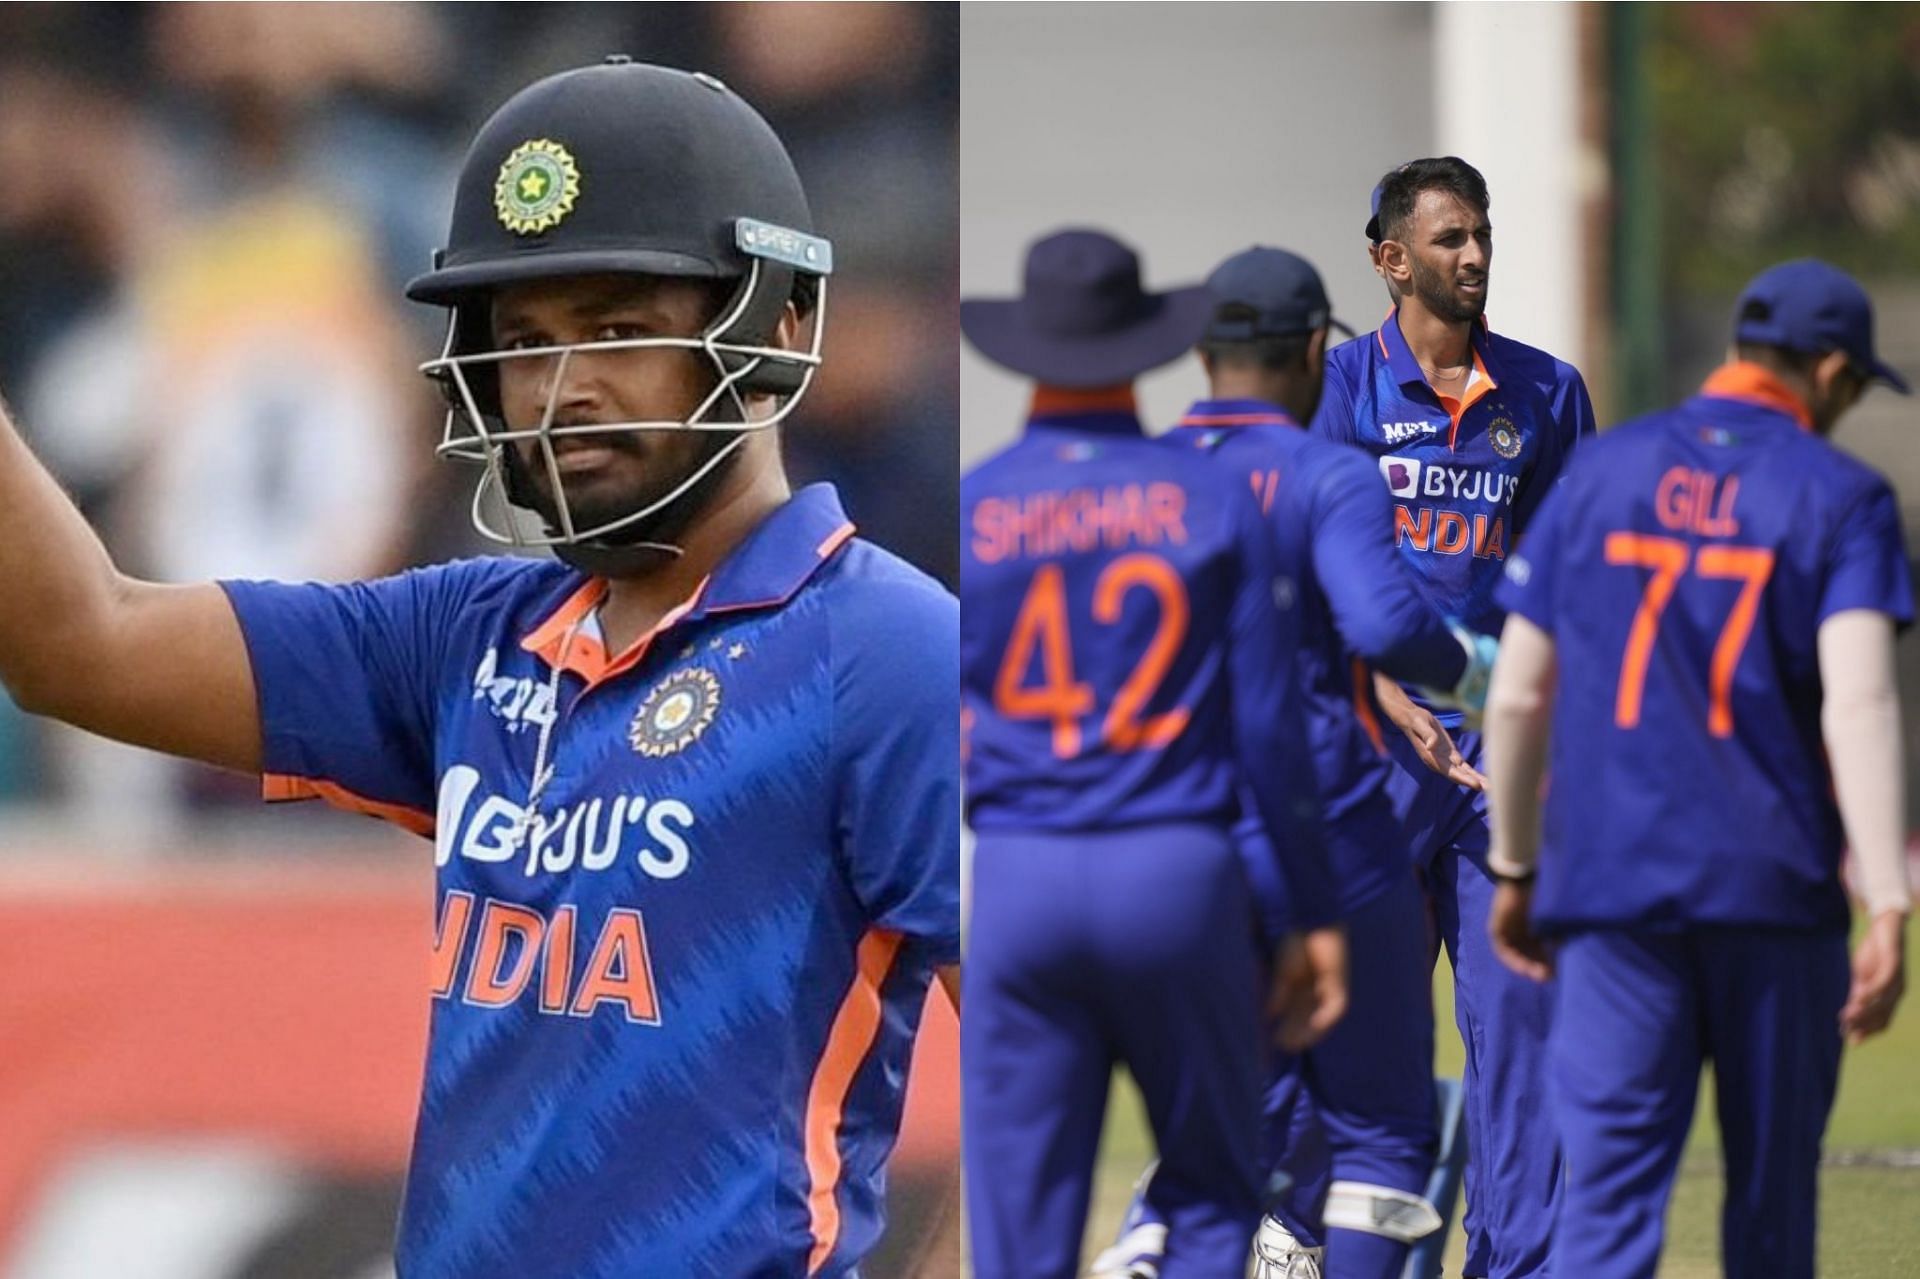 Team India won the second ODI by 5 wickets